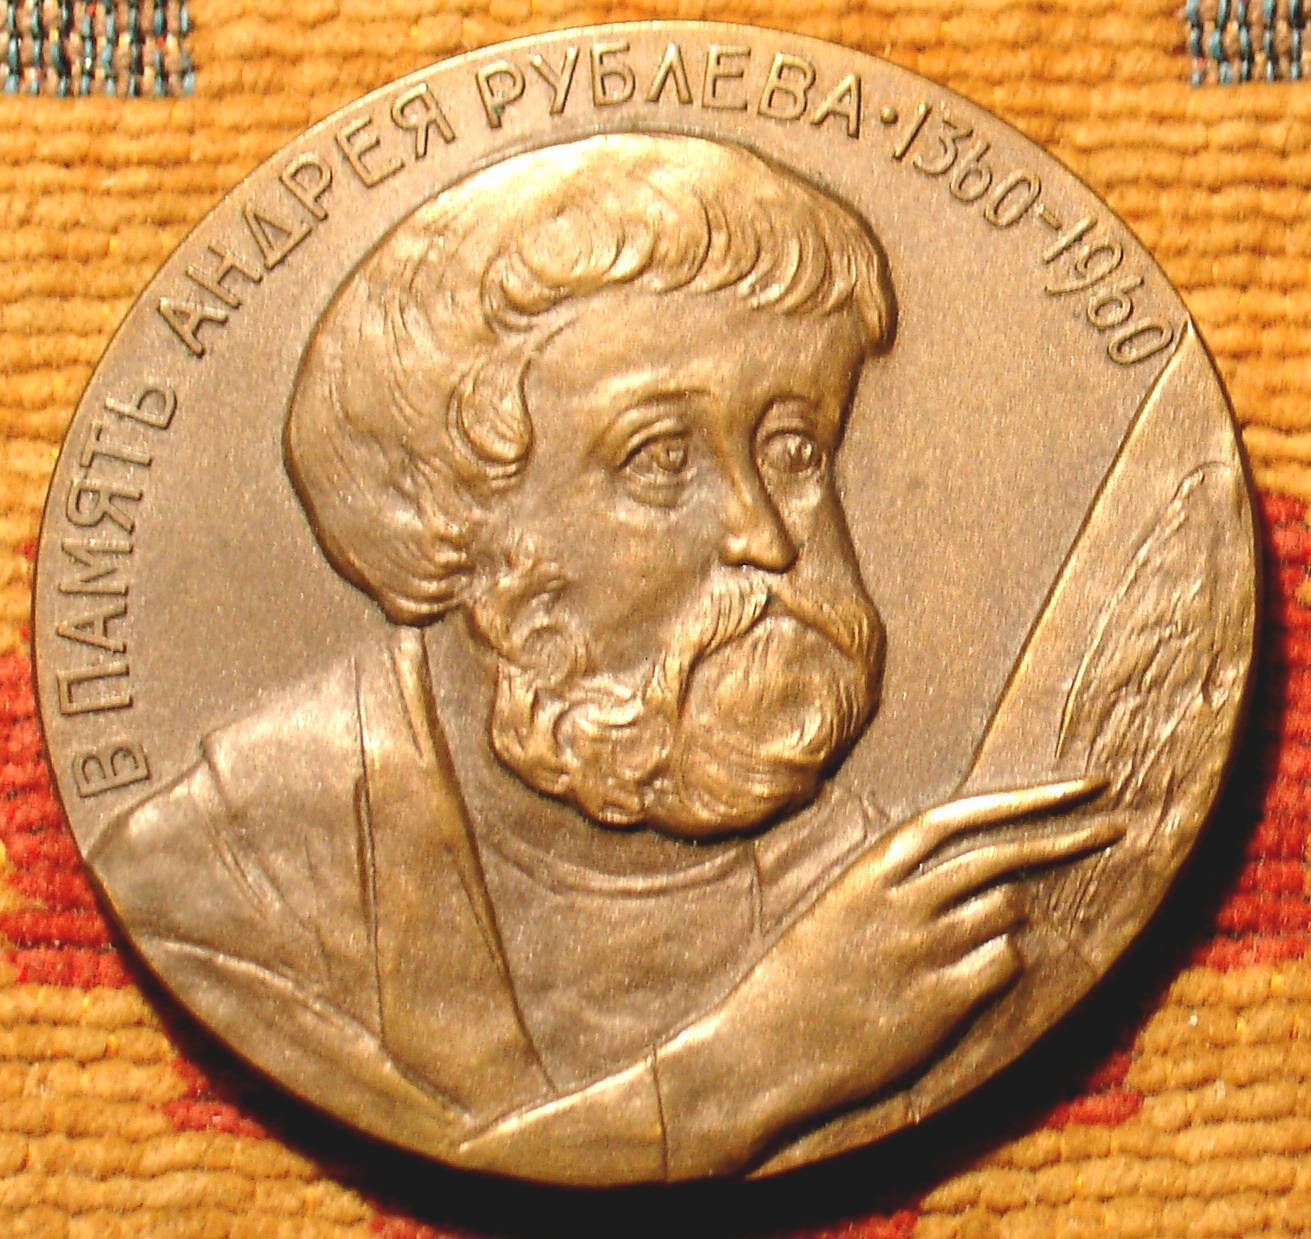 1960 RUSSIAN LARGE  BRONZE MEDAL ANDREY RUBLEV ICON ART MASTER ARTIST UNC BEAUTY